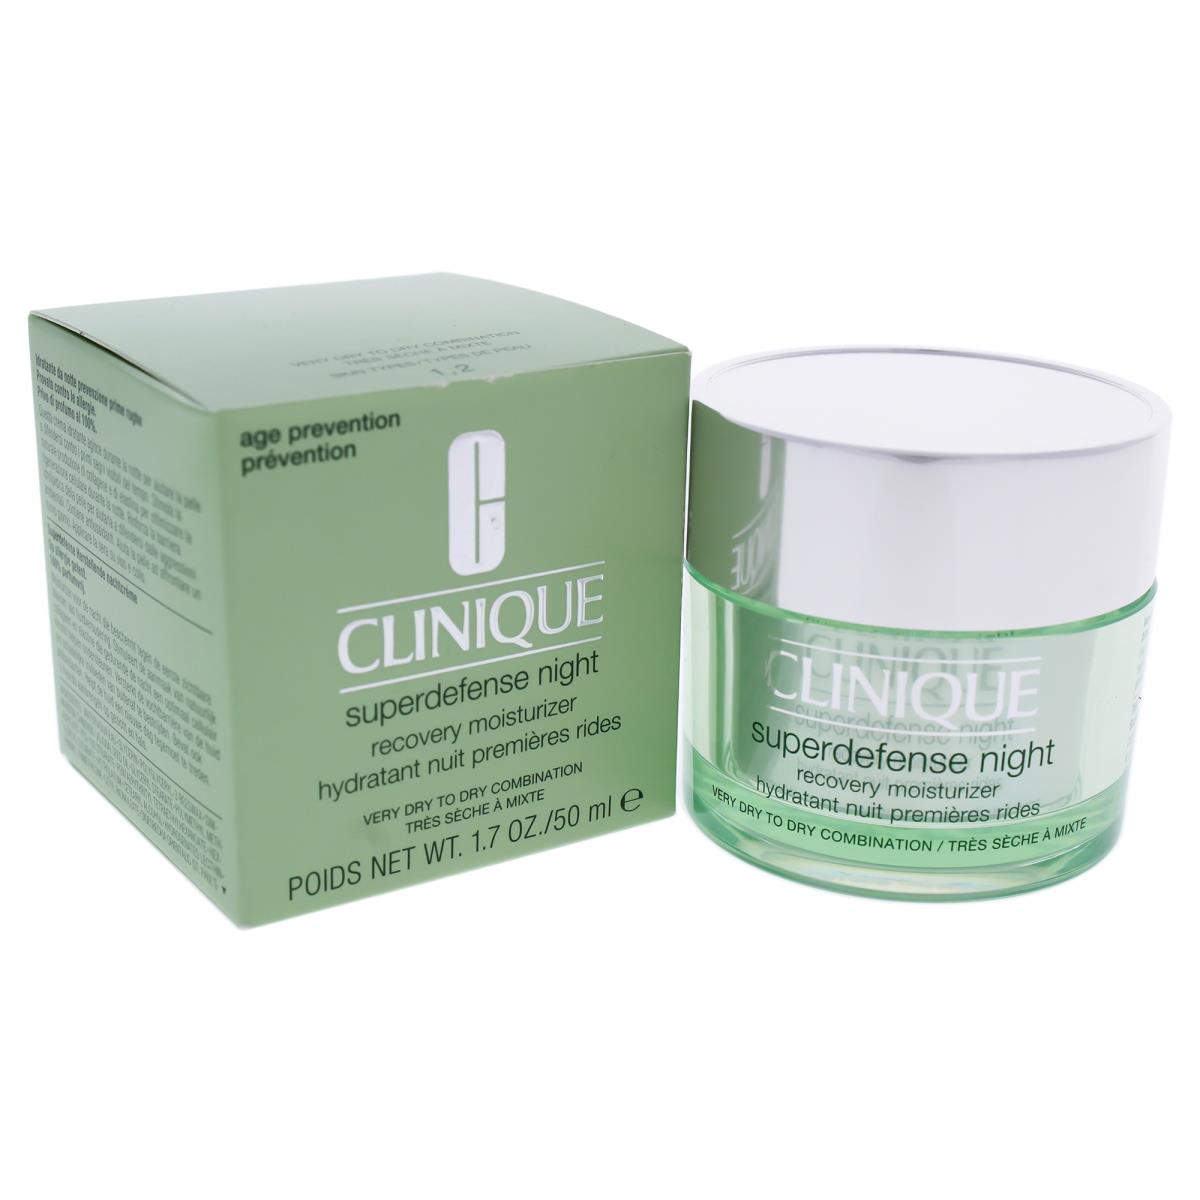 Superdefense Night Recovery Moisturizer by Clinique For Unisex - 1.7 oz